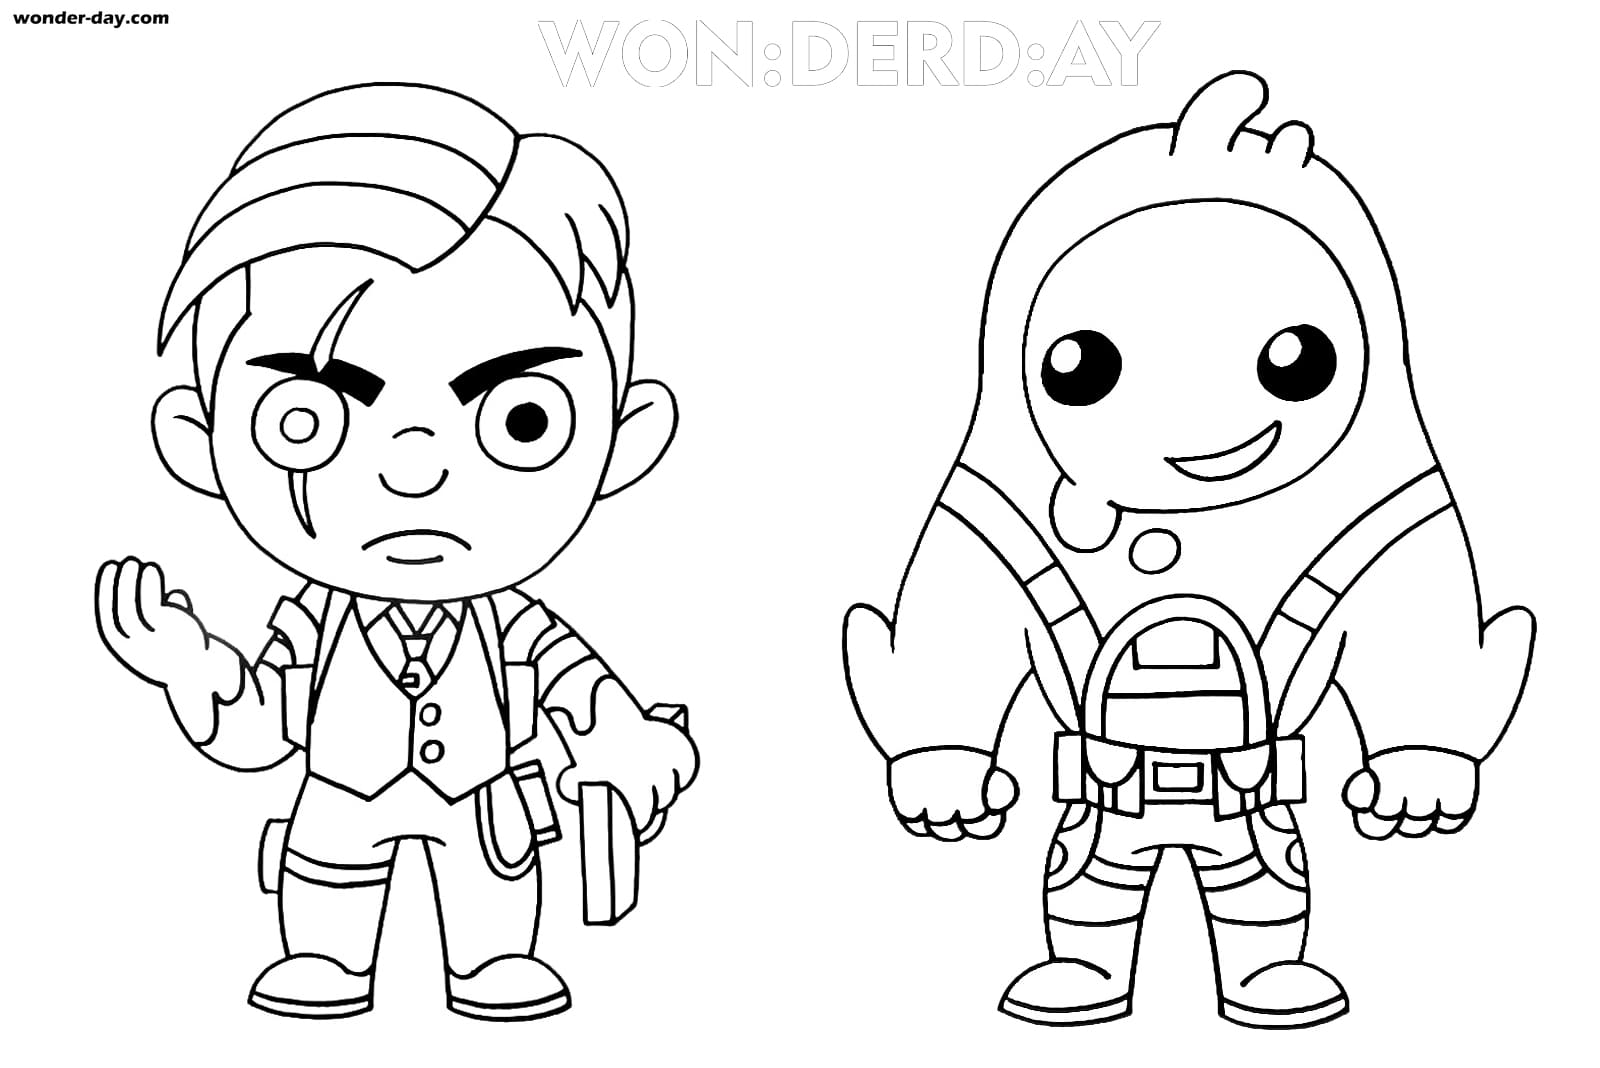 sundhed Downtown Skærm Midas Fortnite coloring pages. Print for free | WONDER DAY — Coloring pages  for children and adults